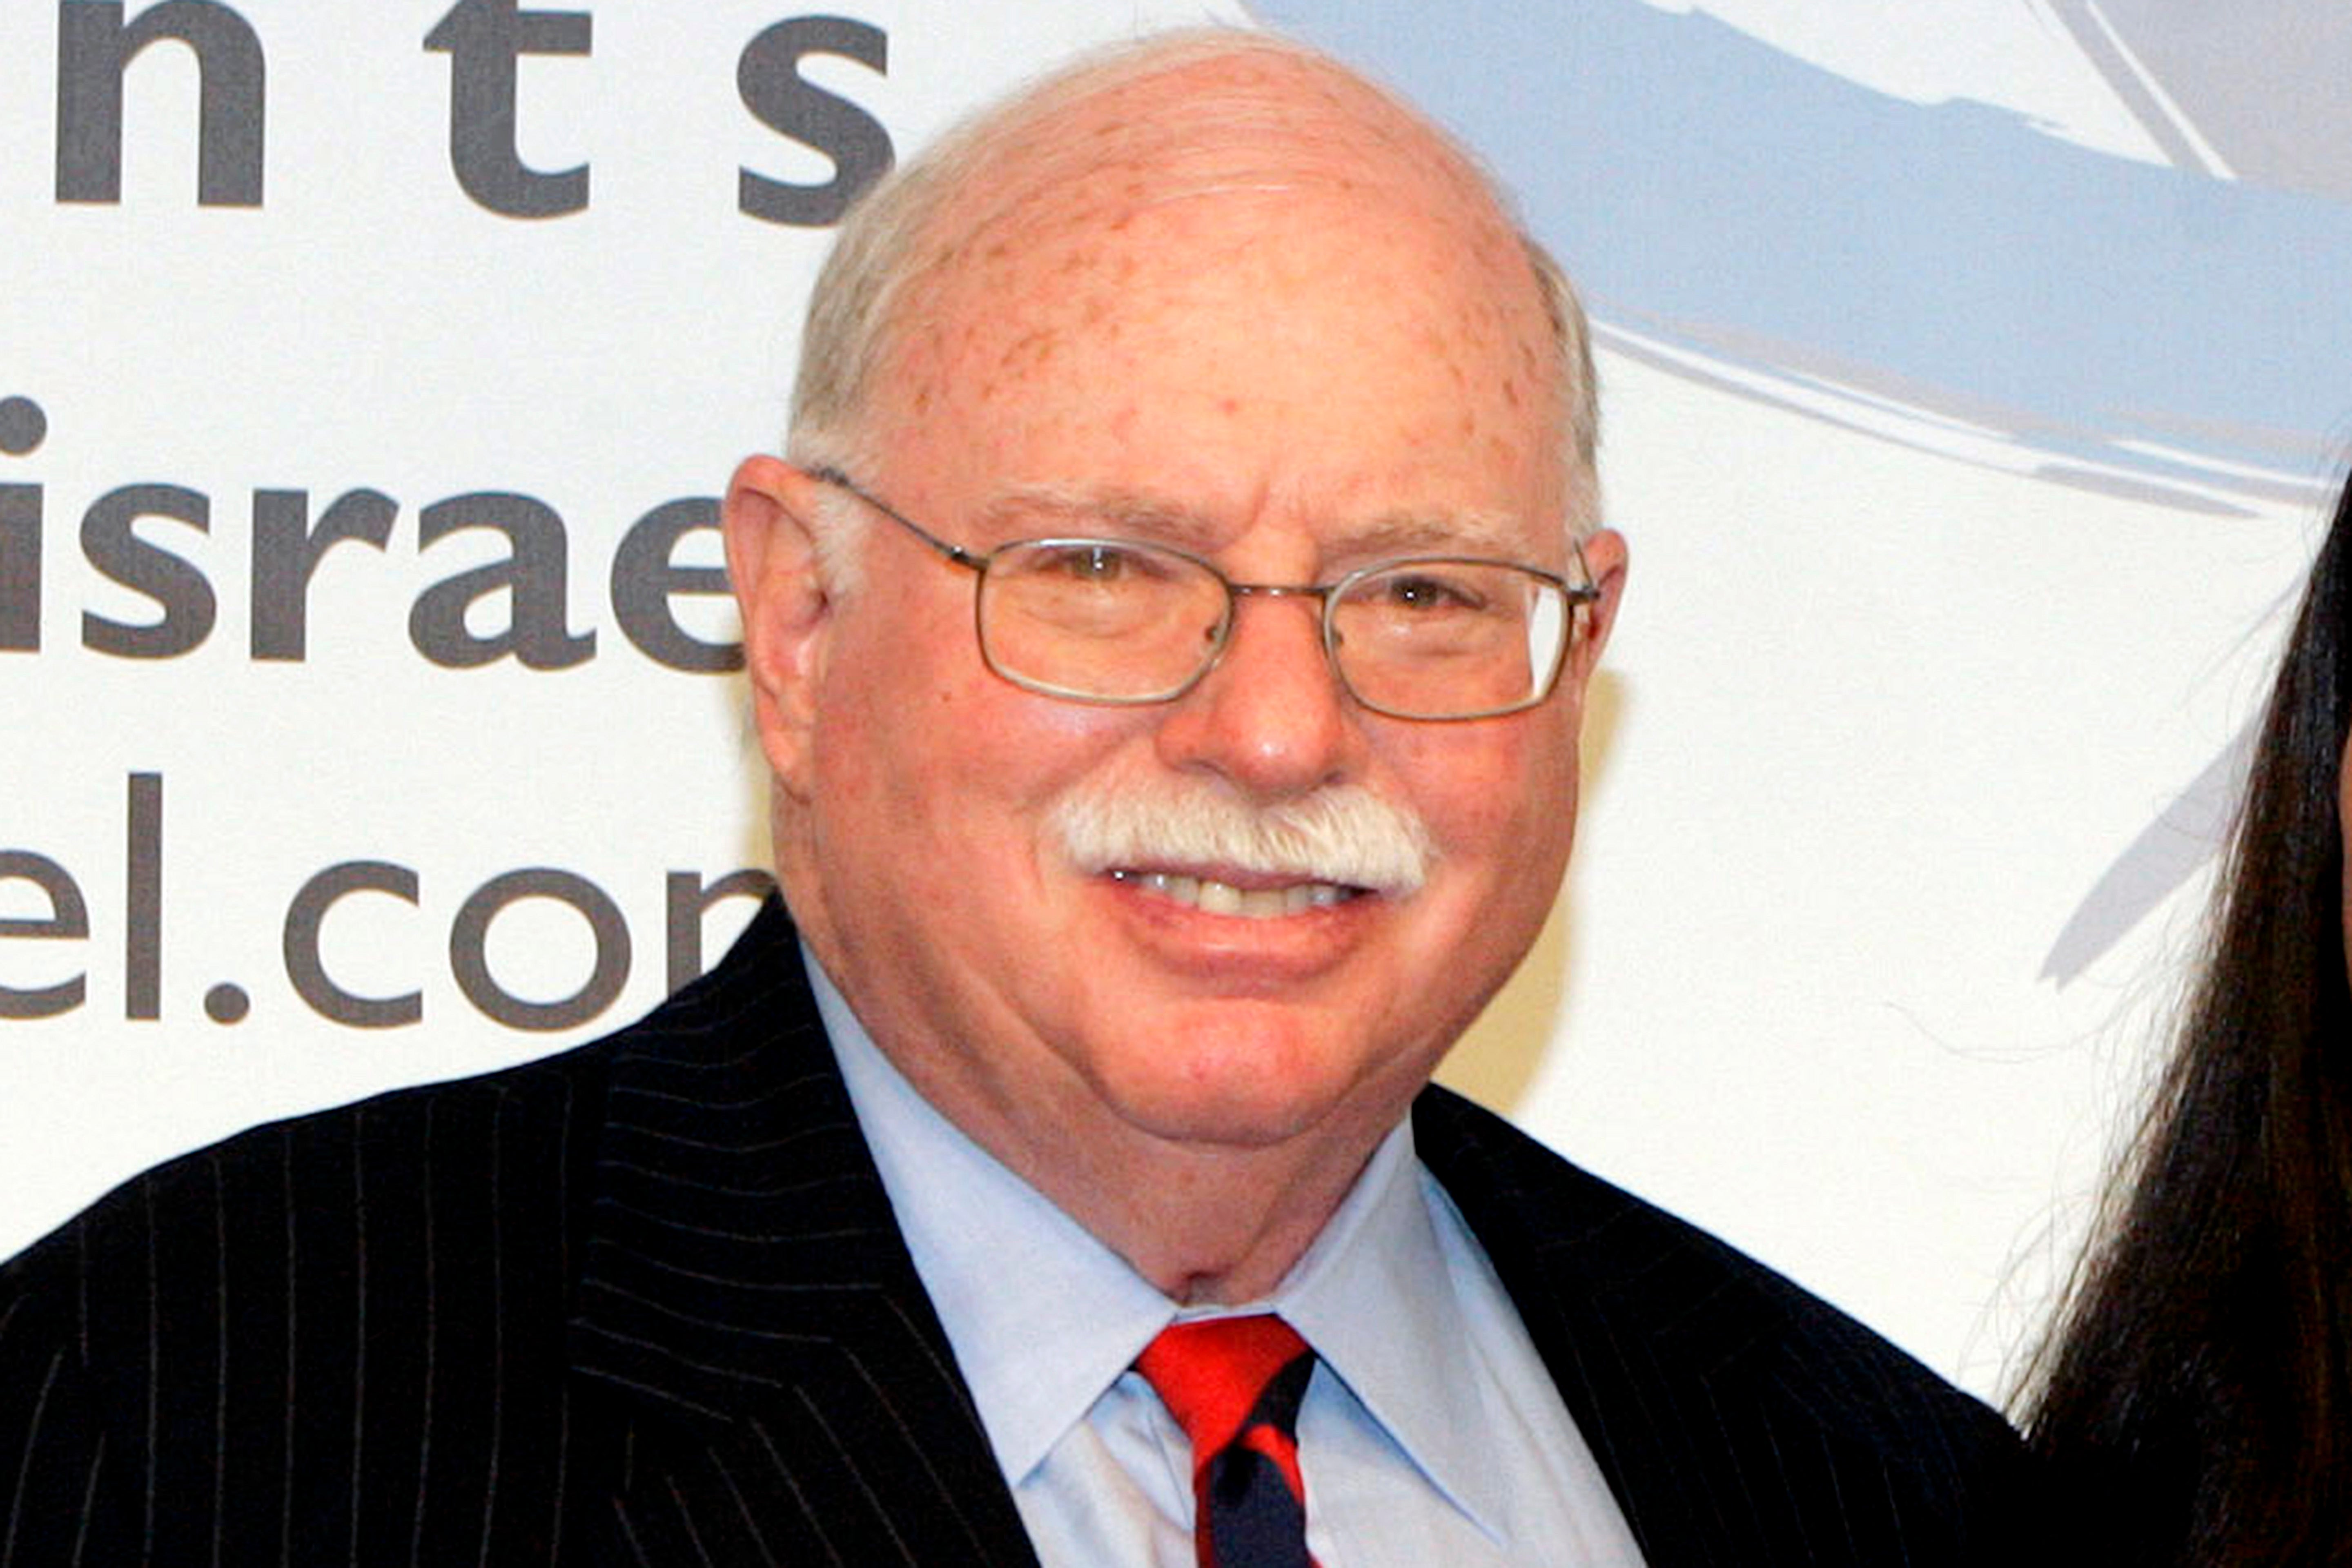 Hedge fund manager and art collector Michael Steinhardt